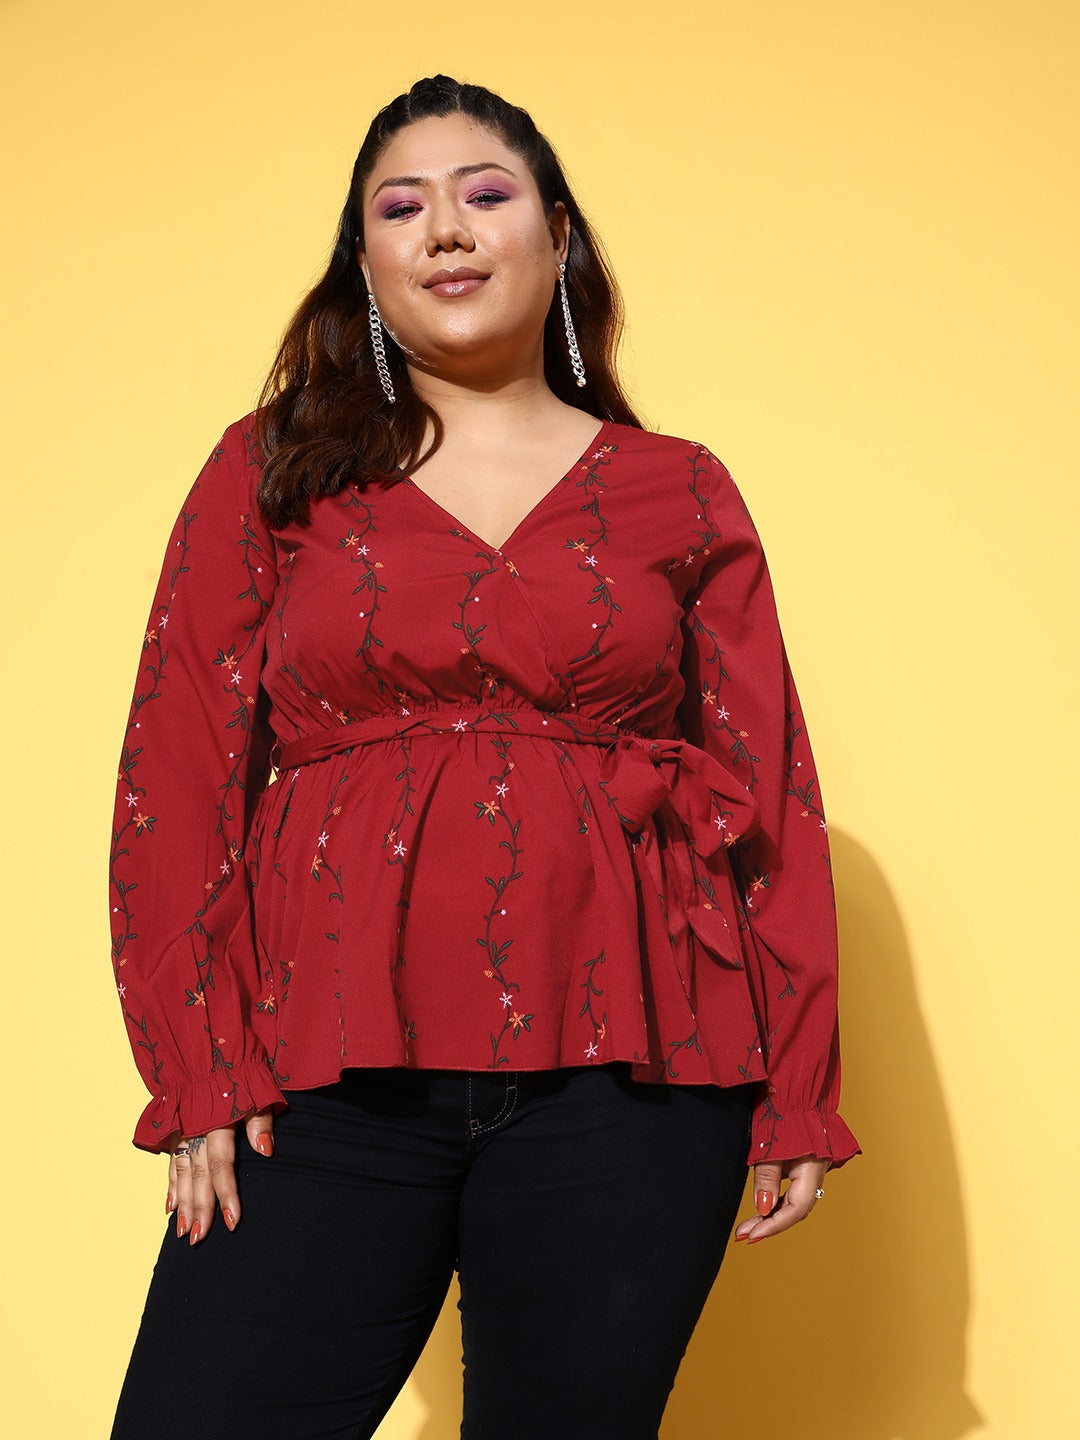 Curvalicious Clothes :: Plus Size Tops :: Whimsical Wrap Top